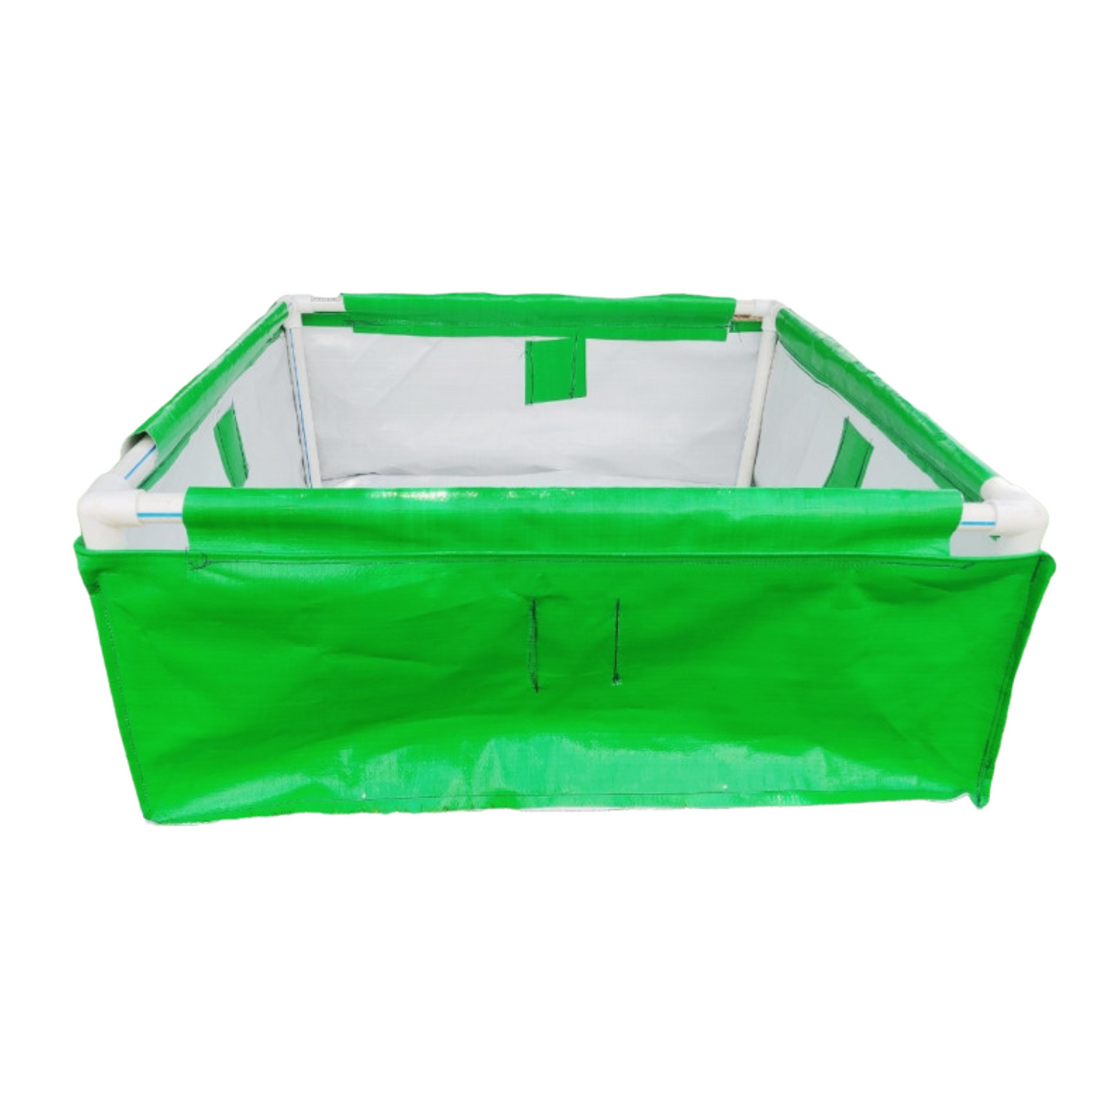 36x36x12 Inches (3x3x1 Ft) - 400 GSM HDPE Rectangular Grow Bag With Supporting PVC Pipes